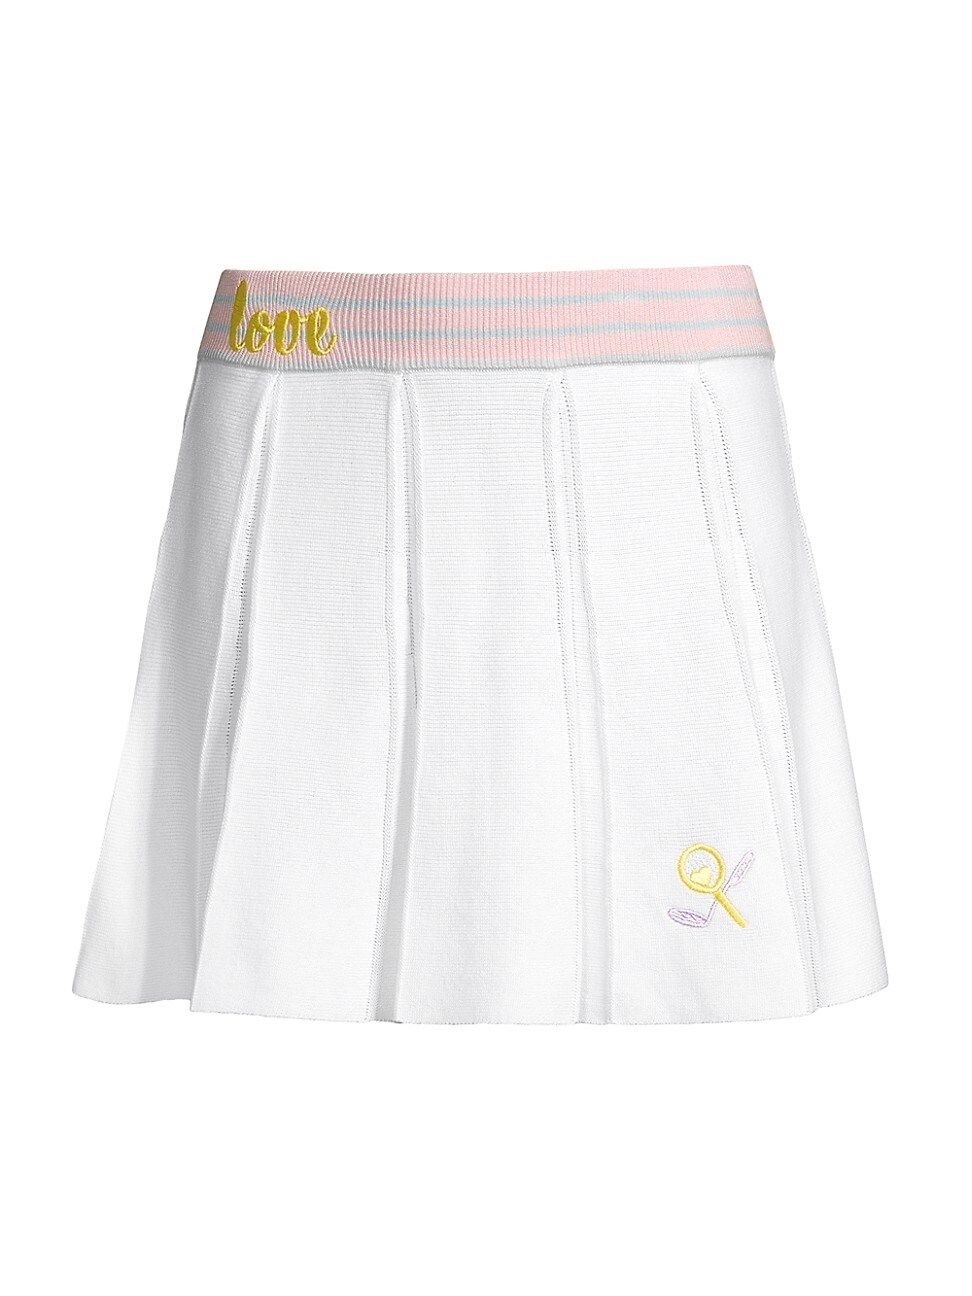 Women's Roz Embroidered Knit Tennis Skirt - Tennis Whites - Size XL - Tennis Whites - Size XL | Saks Fifth Avenue